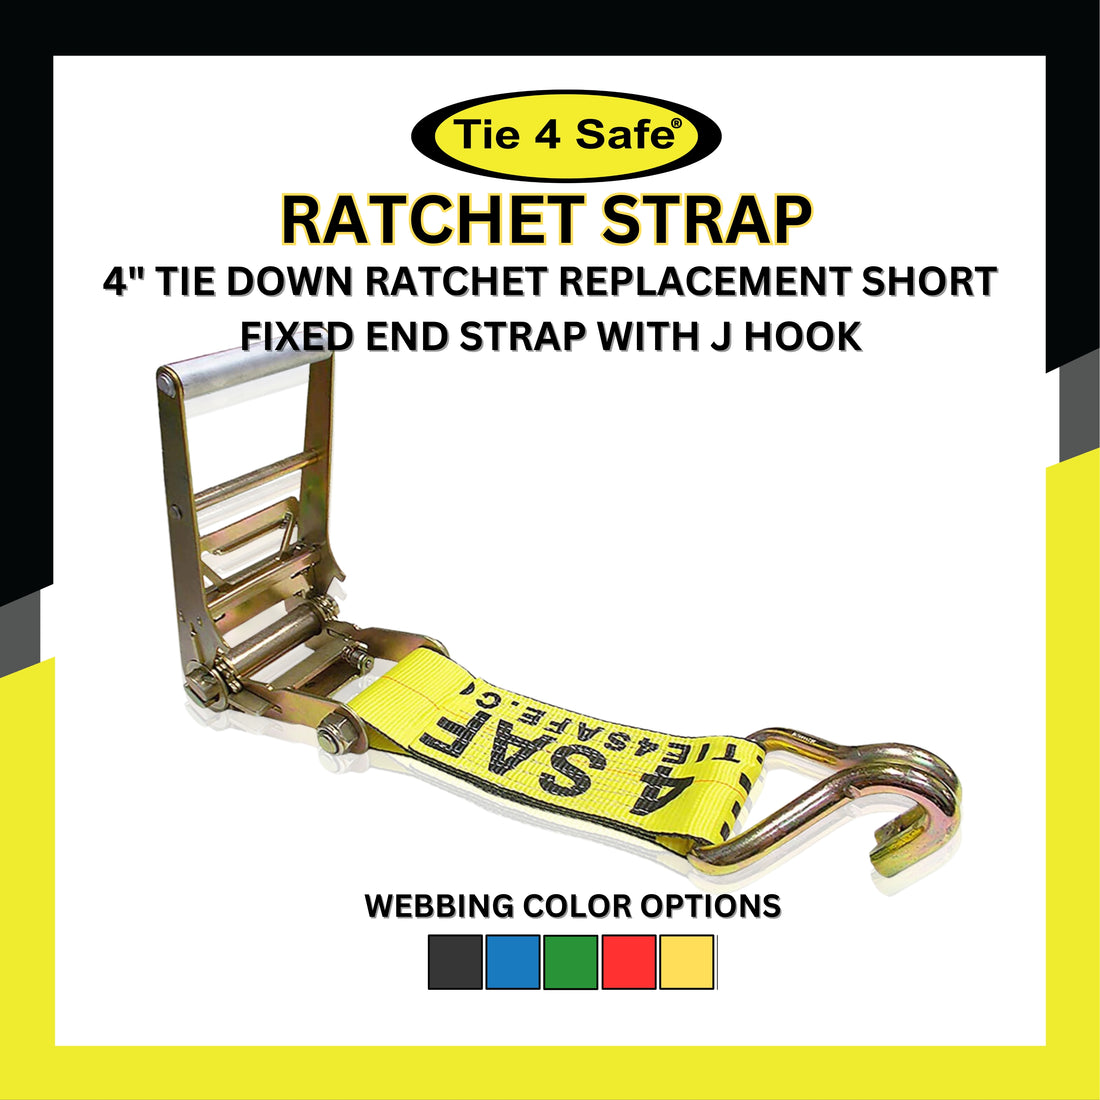 USA 3" & 4" Ratchet Tie Down Short Fixed End Strap With J Hook